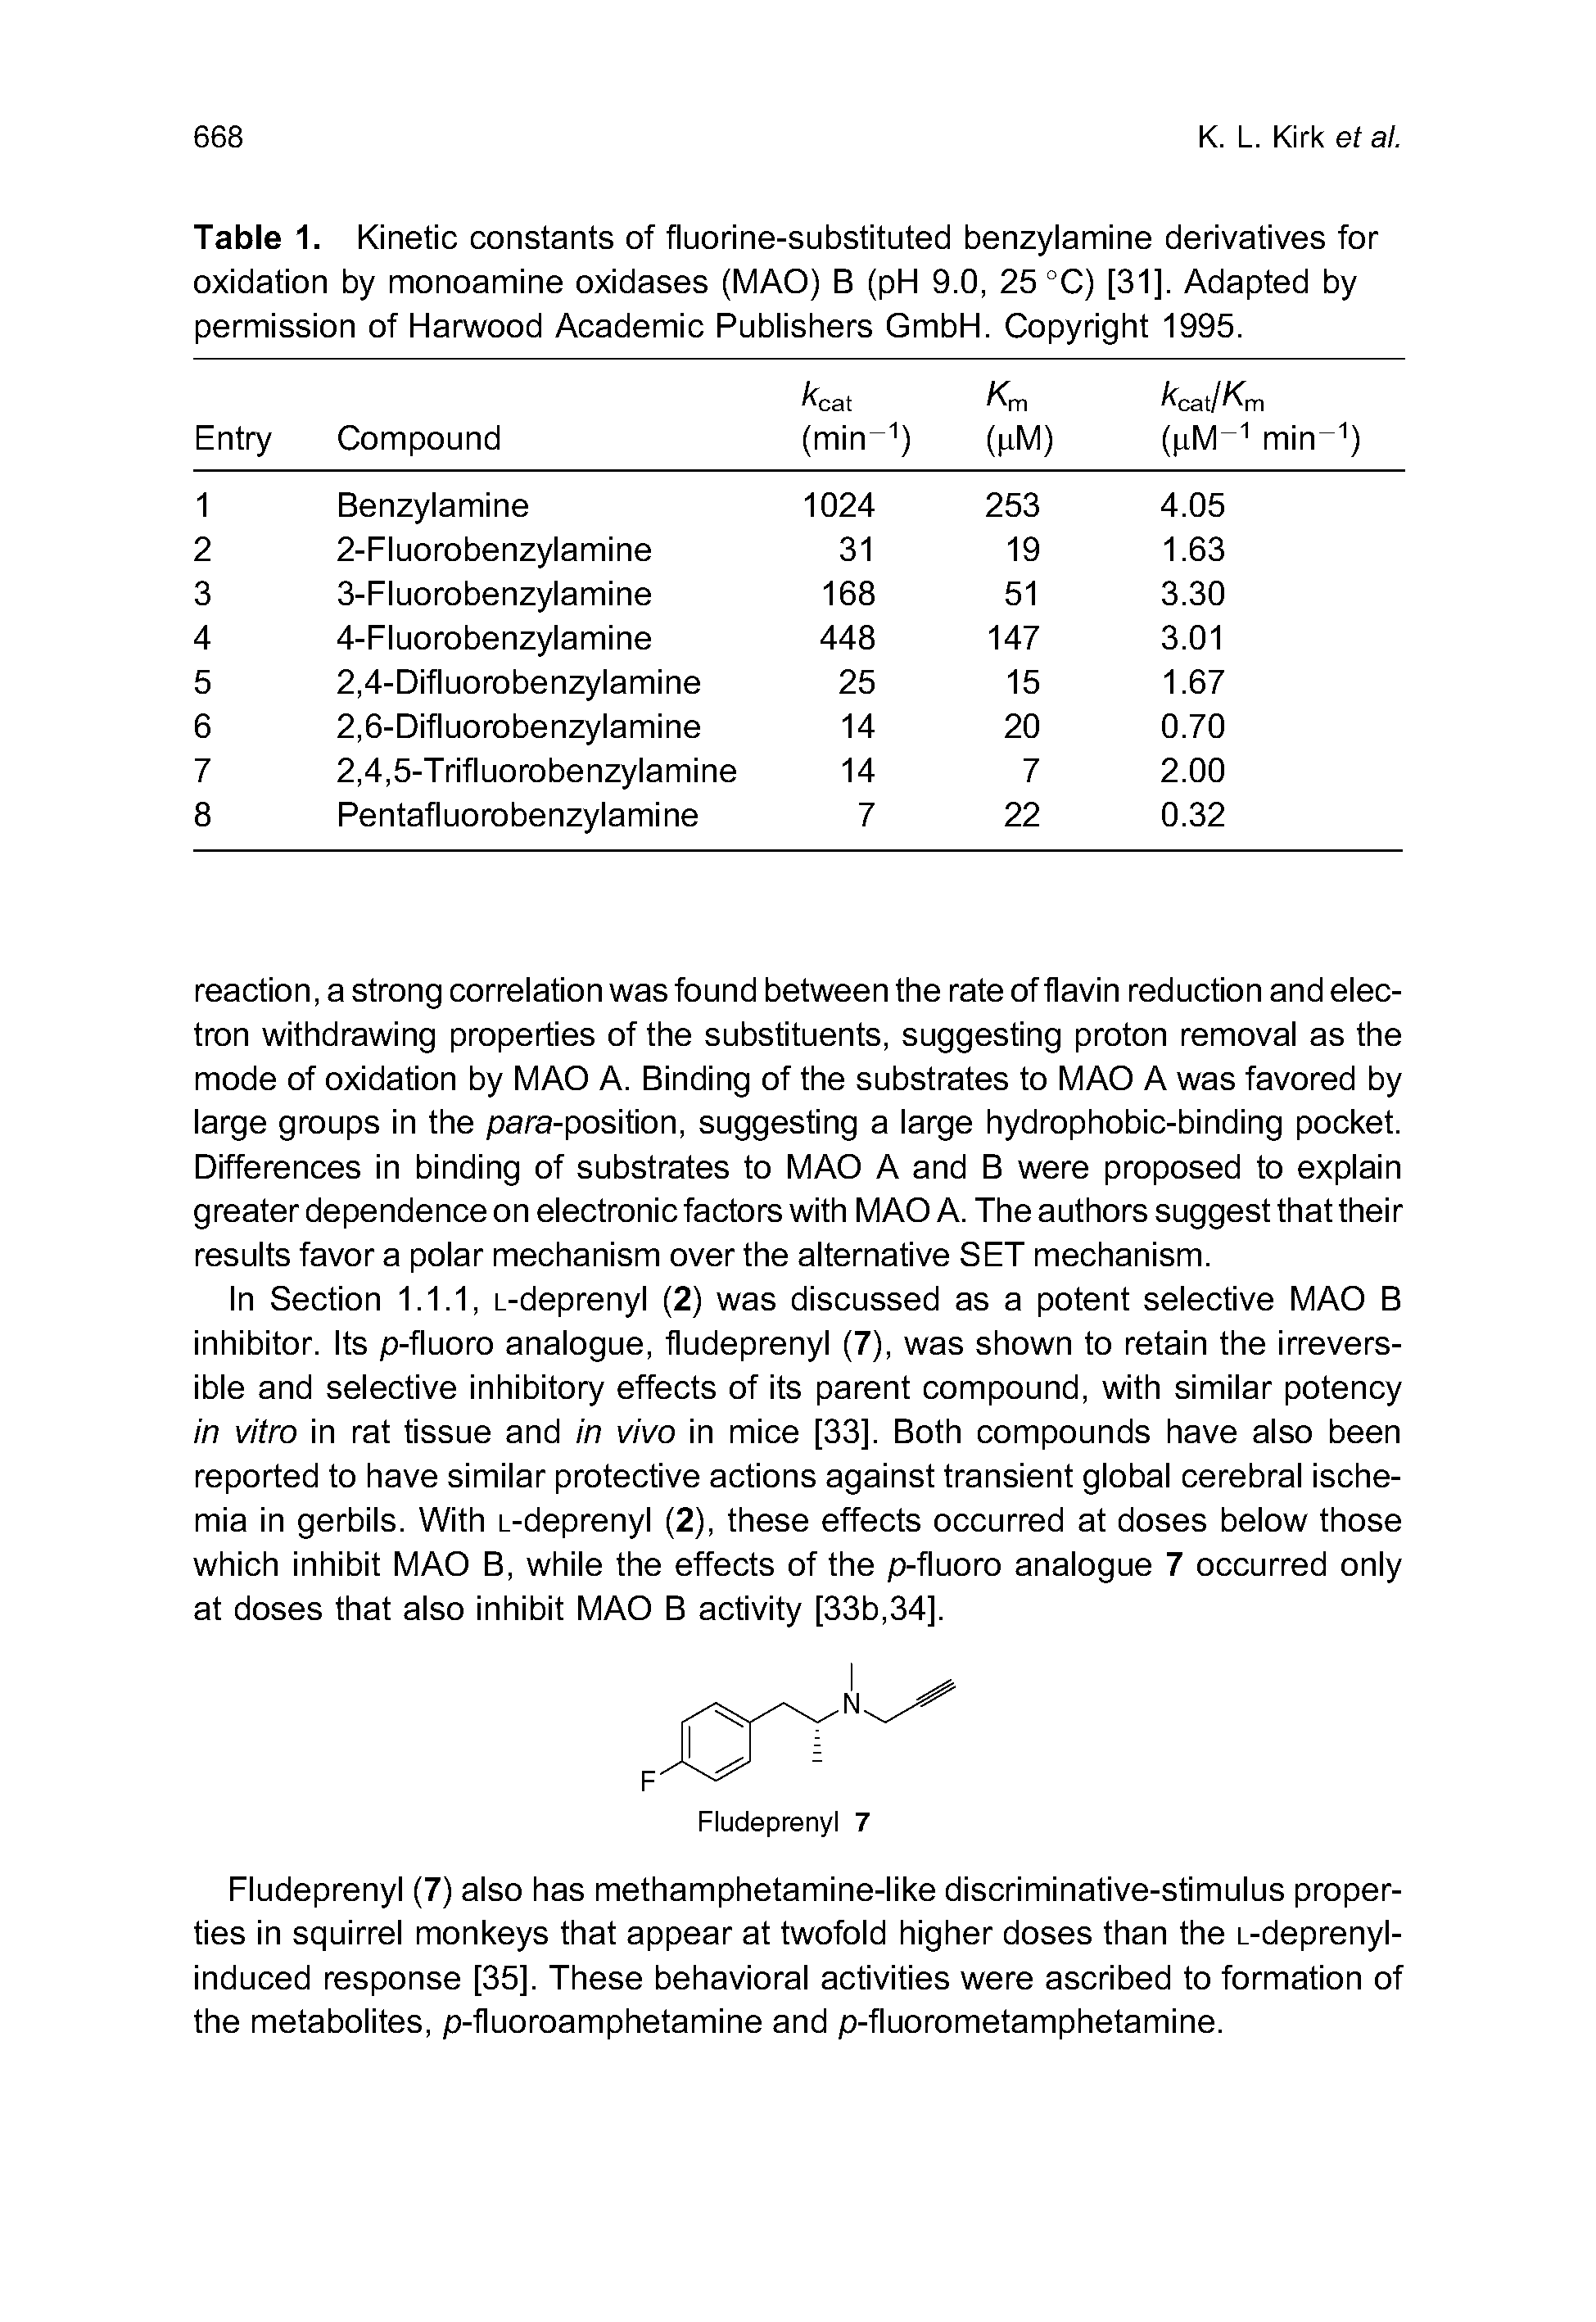 Table 1. Kinetic constants of fluorine-substituted benzylamine derivatives for oxidation by monoamine oxidases (MAO) B (pH 9.0, 25 °C) [31]. Adapted by permission of Harwood Academic Publishers GmbH. Copyright 1995.